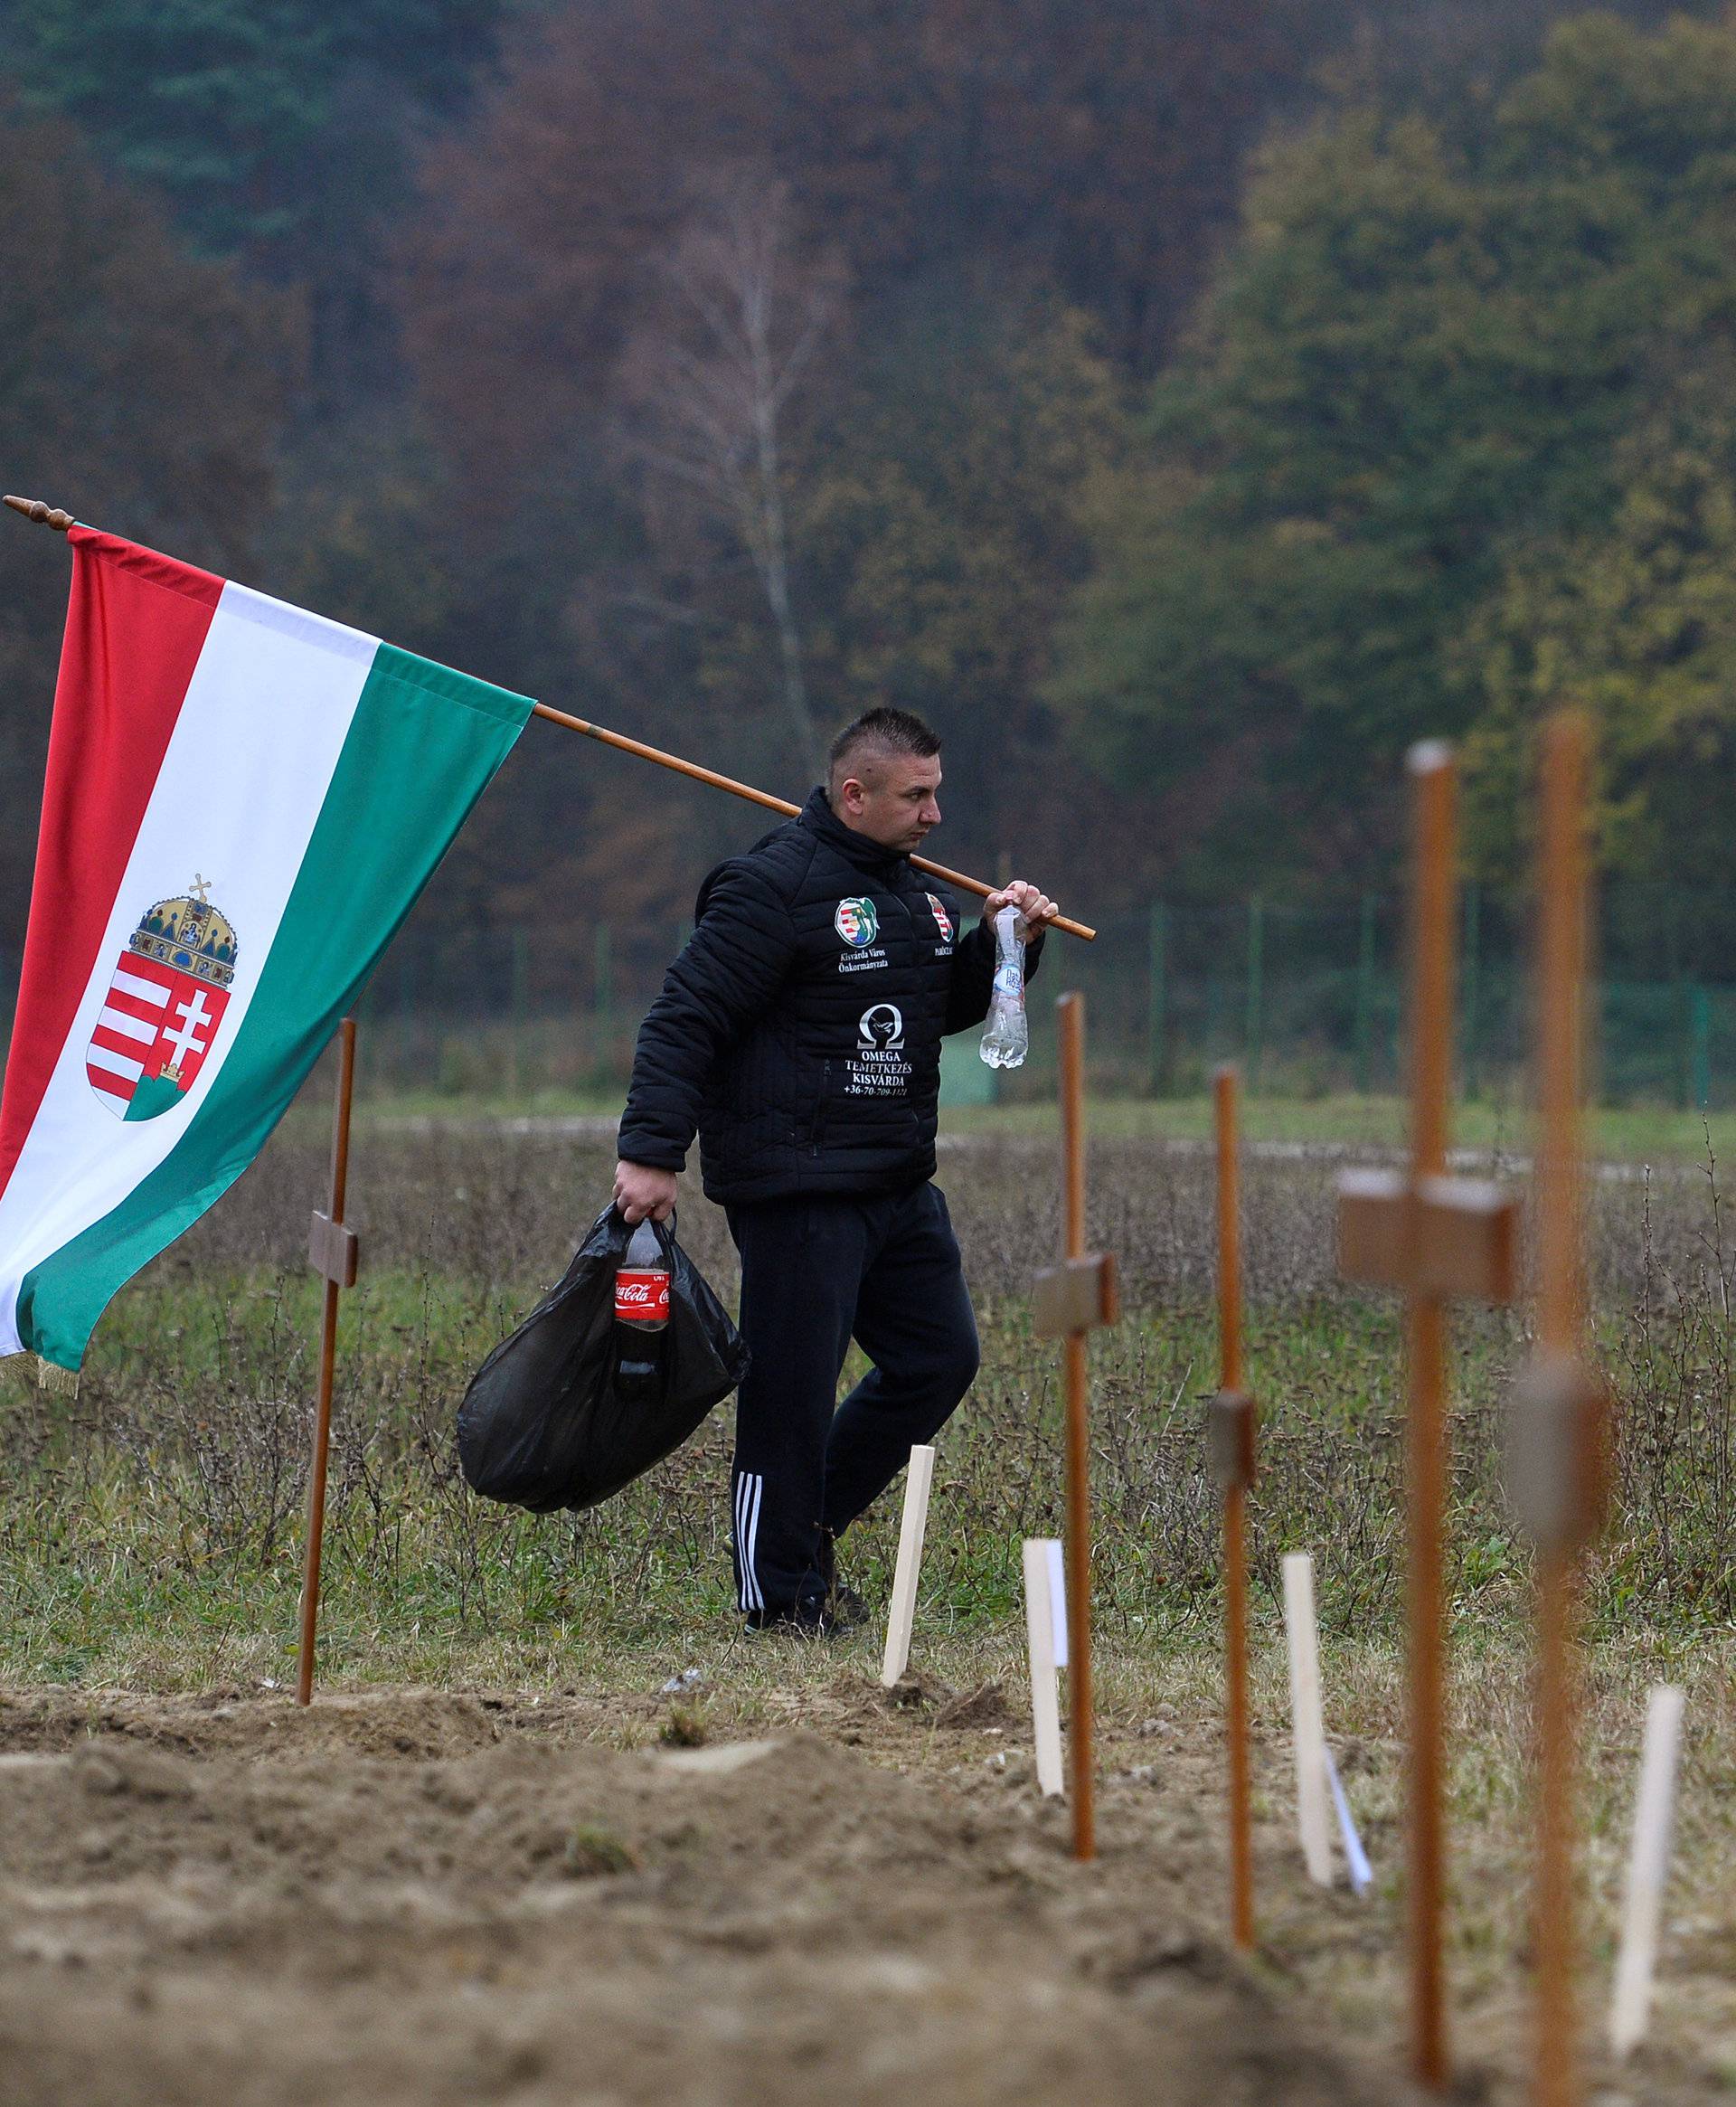 A Hungarian gravedigger finishes his work during a grave digging championship in Trencin, Slovakia